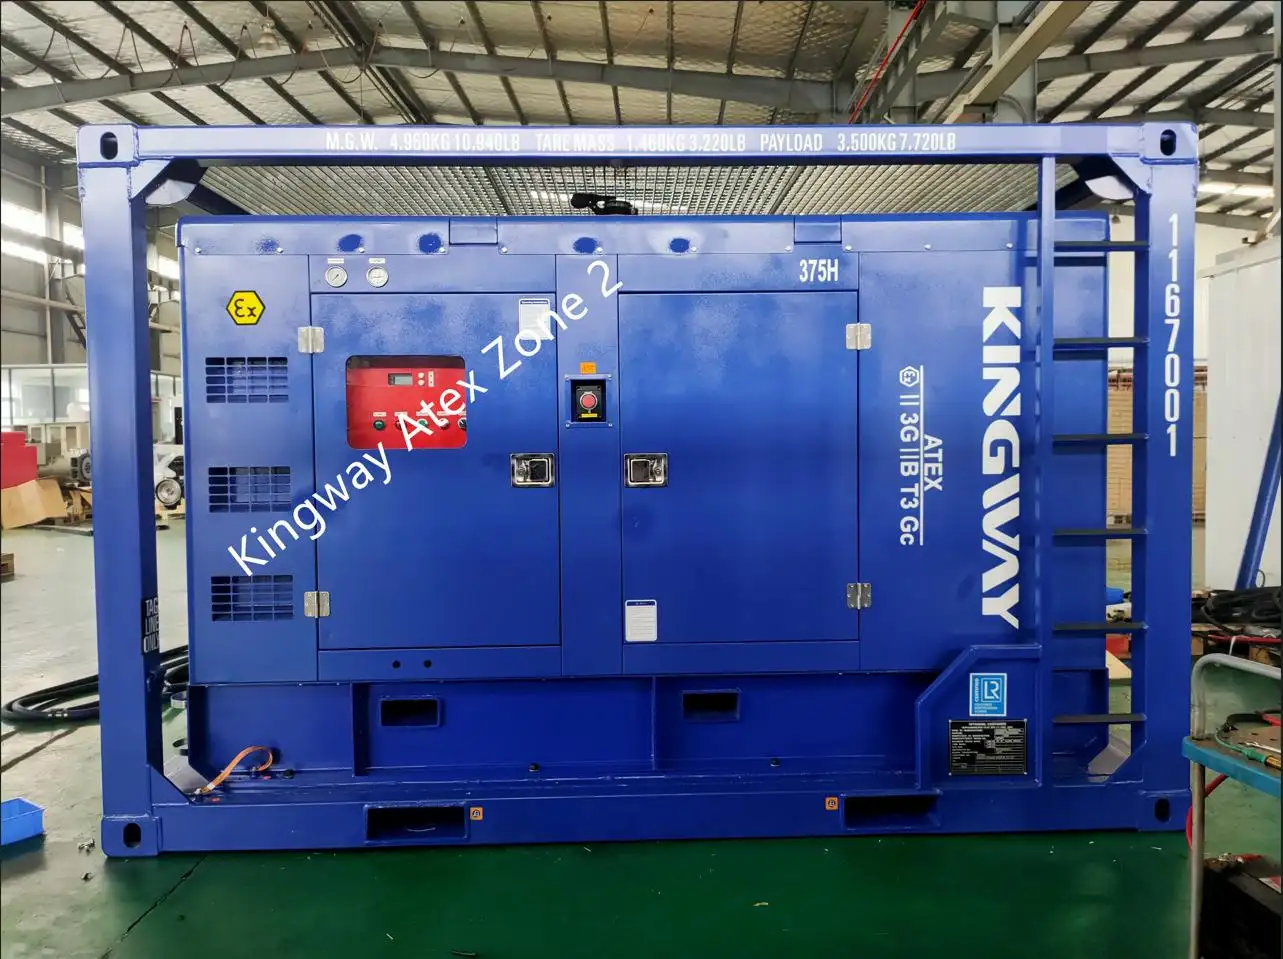 Kingway Atex Certified Zone 2 Explosion Proof Air Compressor Delivered to Client